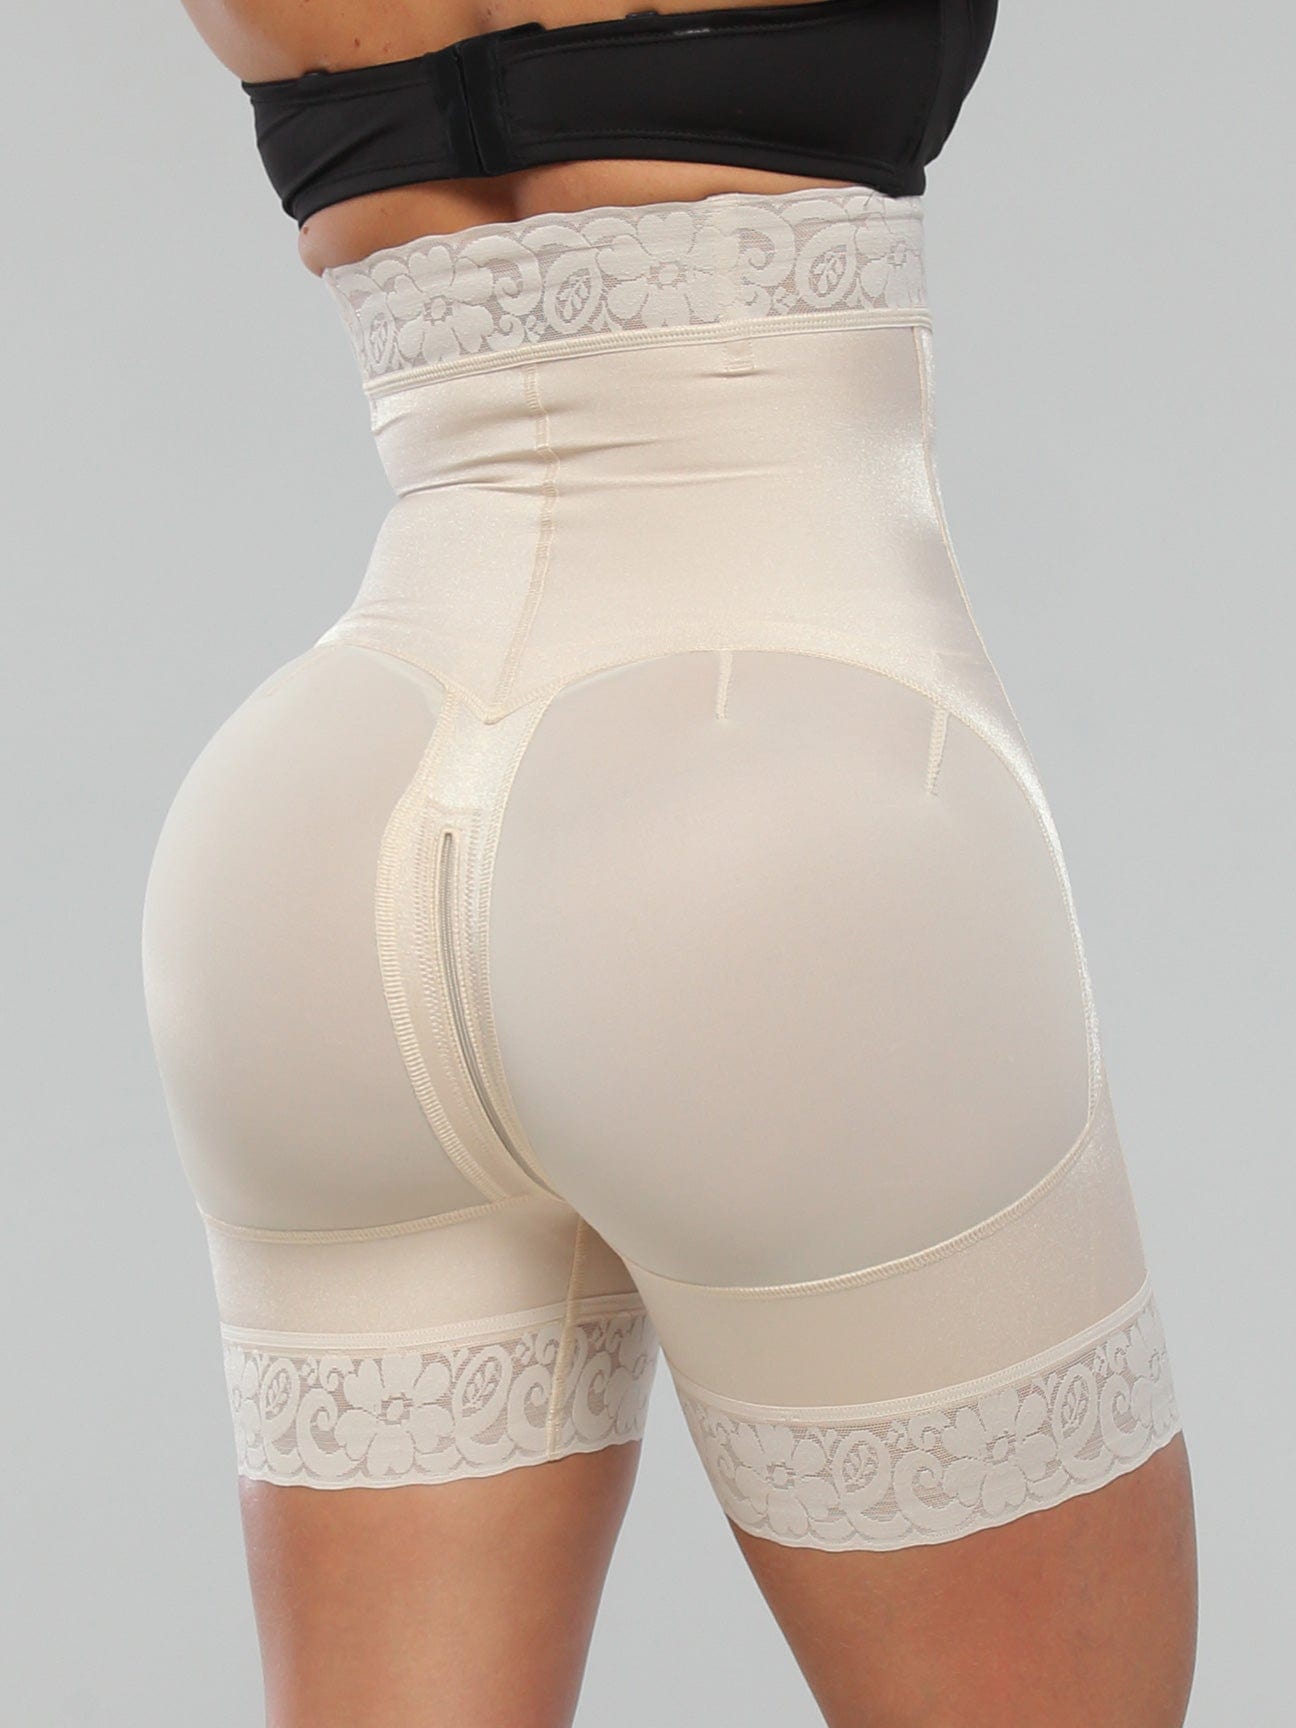 Wedding, Bridal, and Special Event Shapewear